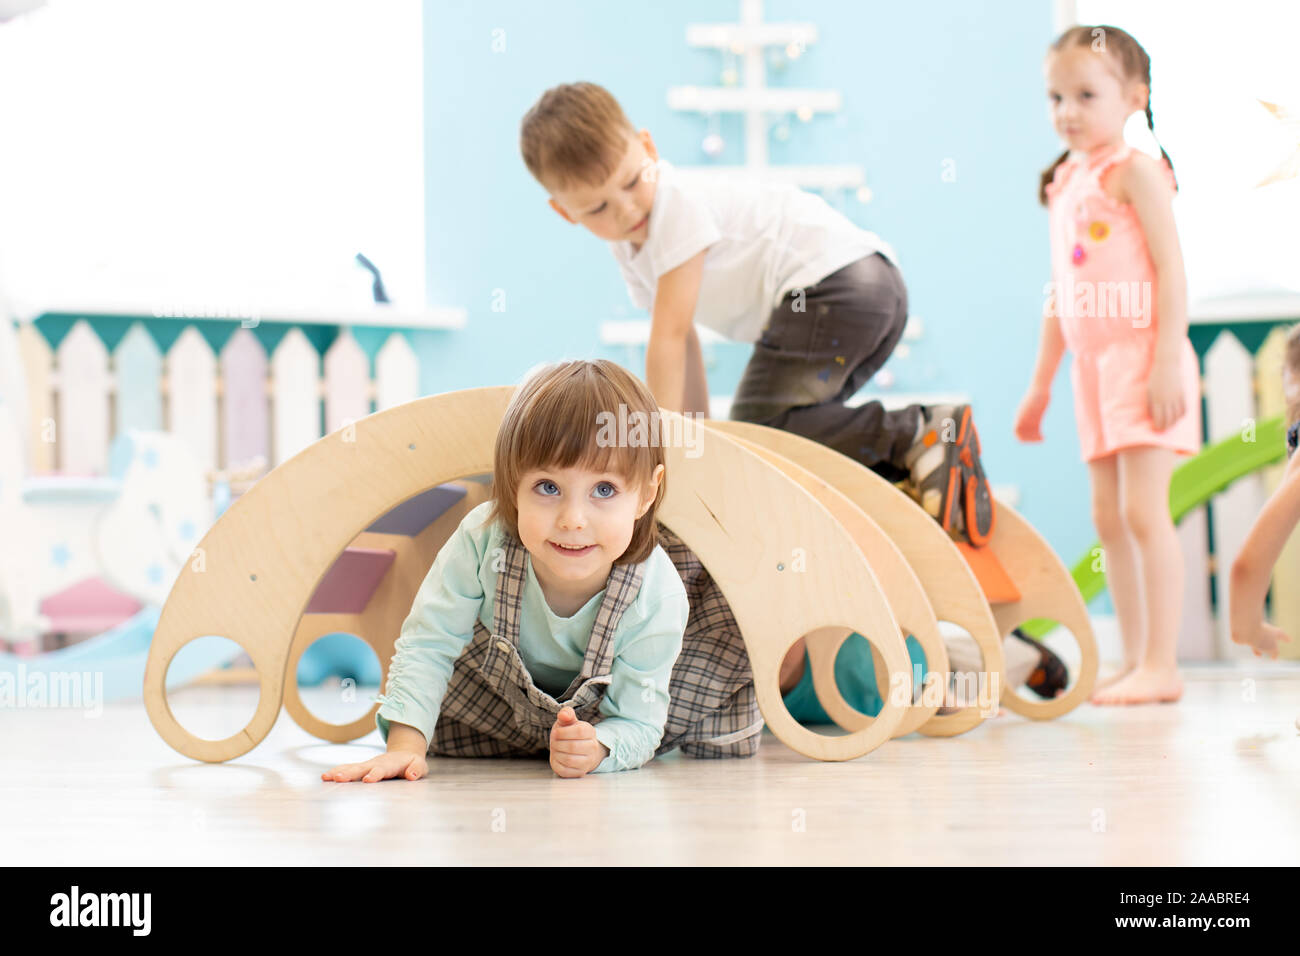 Children play in playroom or daycare centre Stock Photo